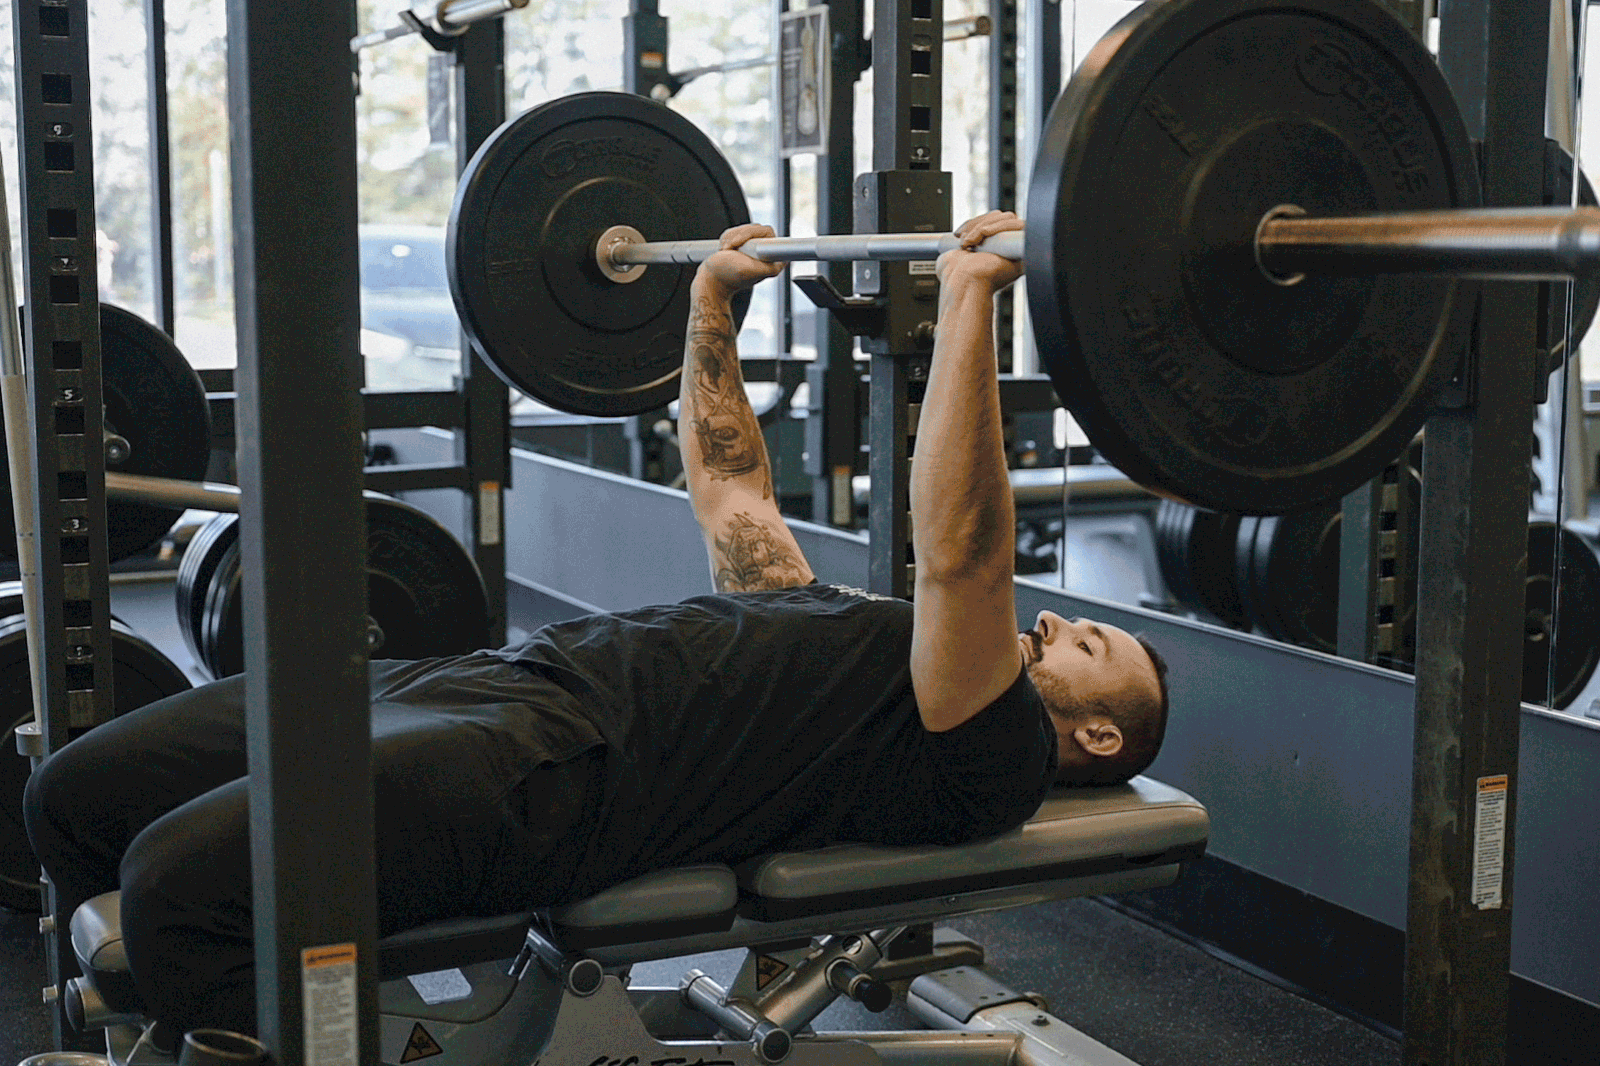 Coach Mike demonstrating a barbell bench press in a gym setting.